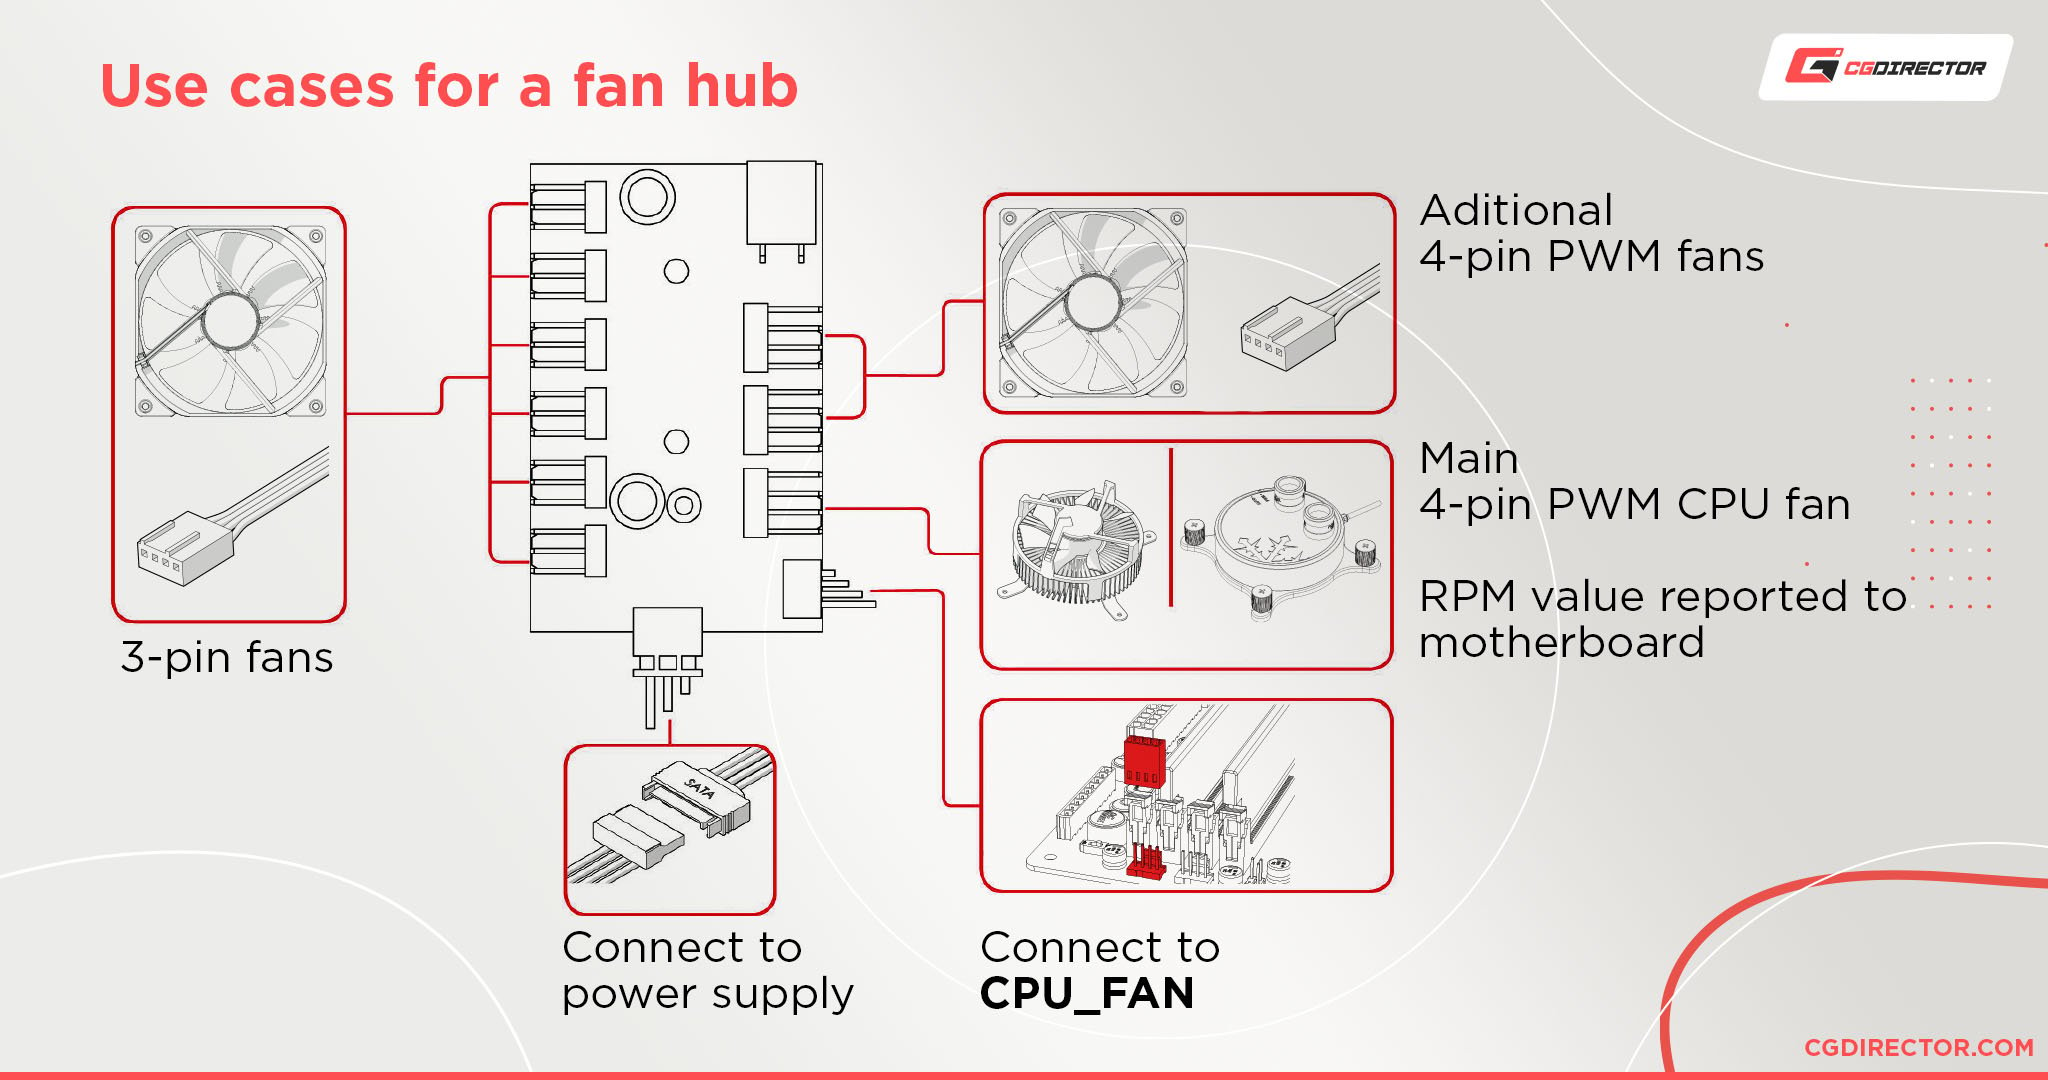 CPU FAN vs. CPU OPT (When to use which)